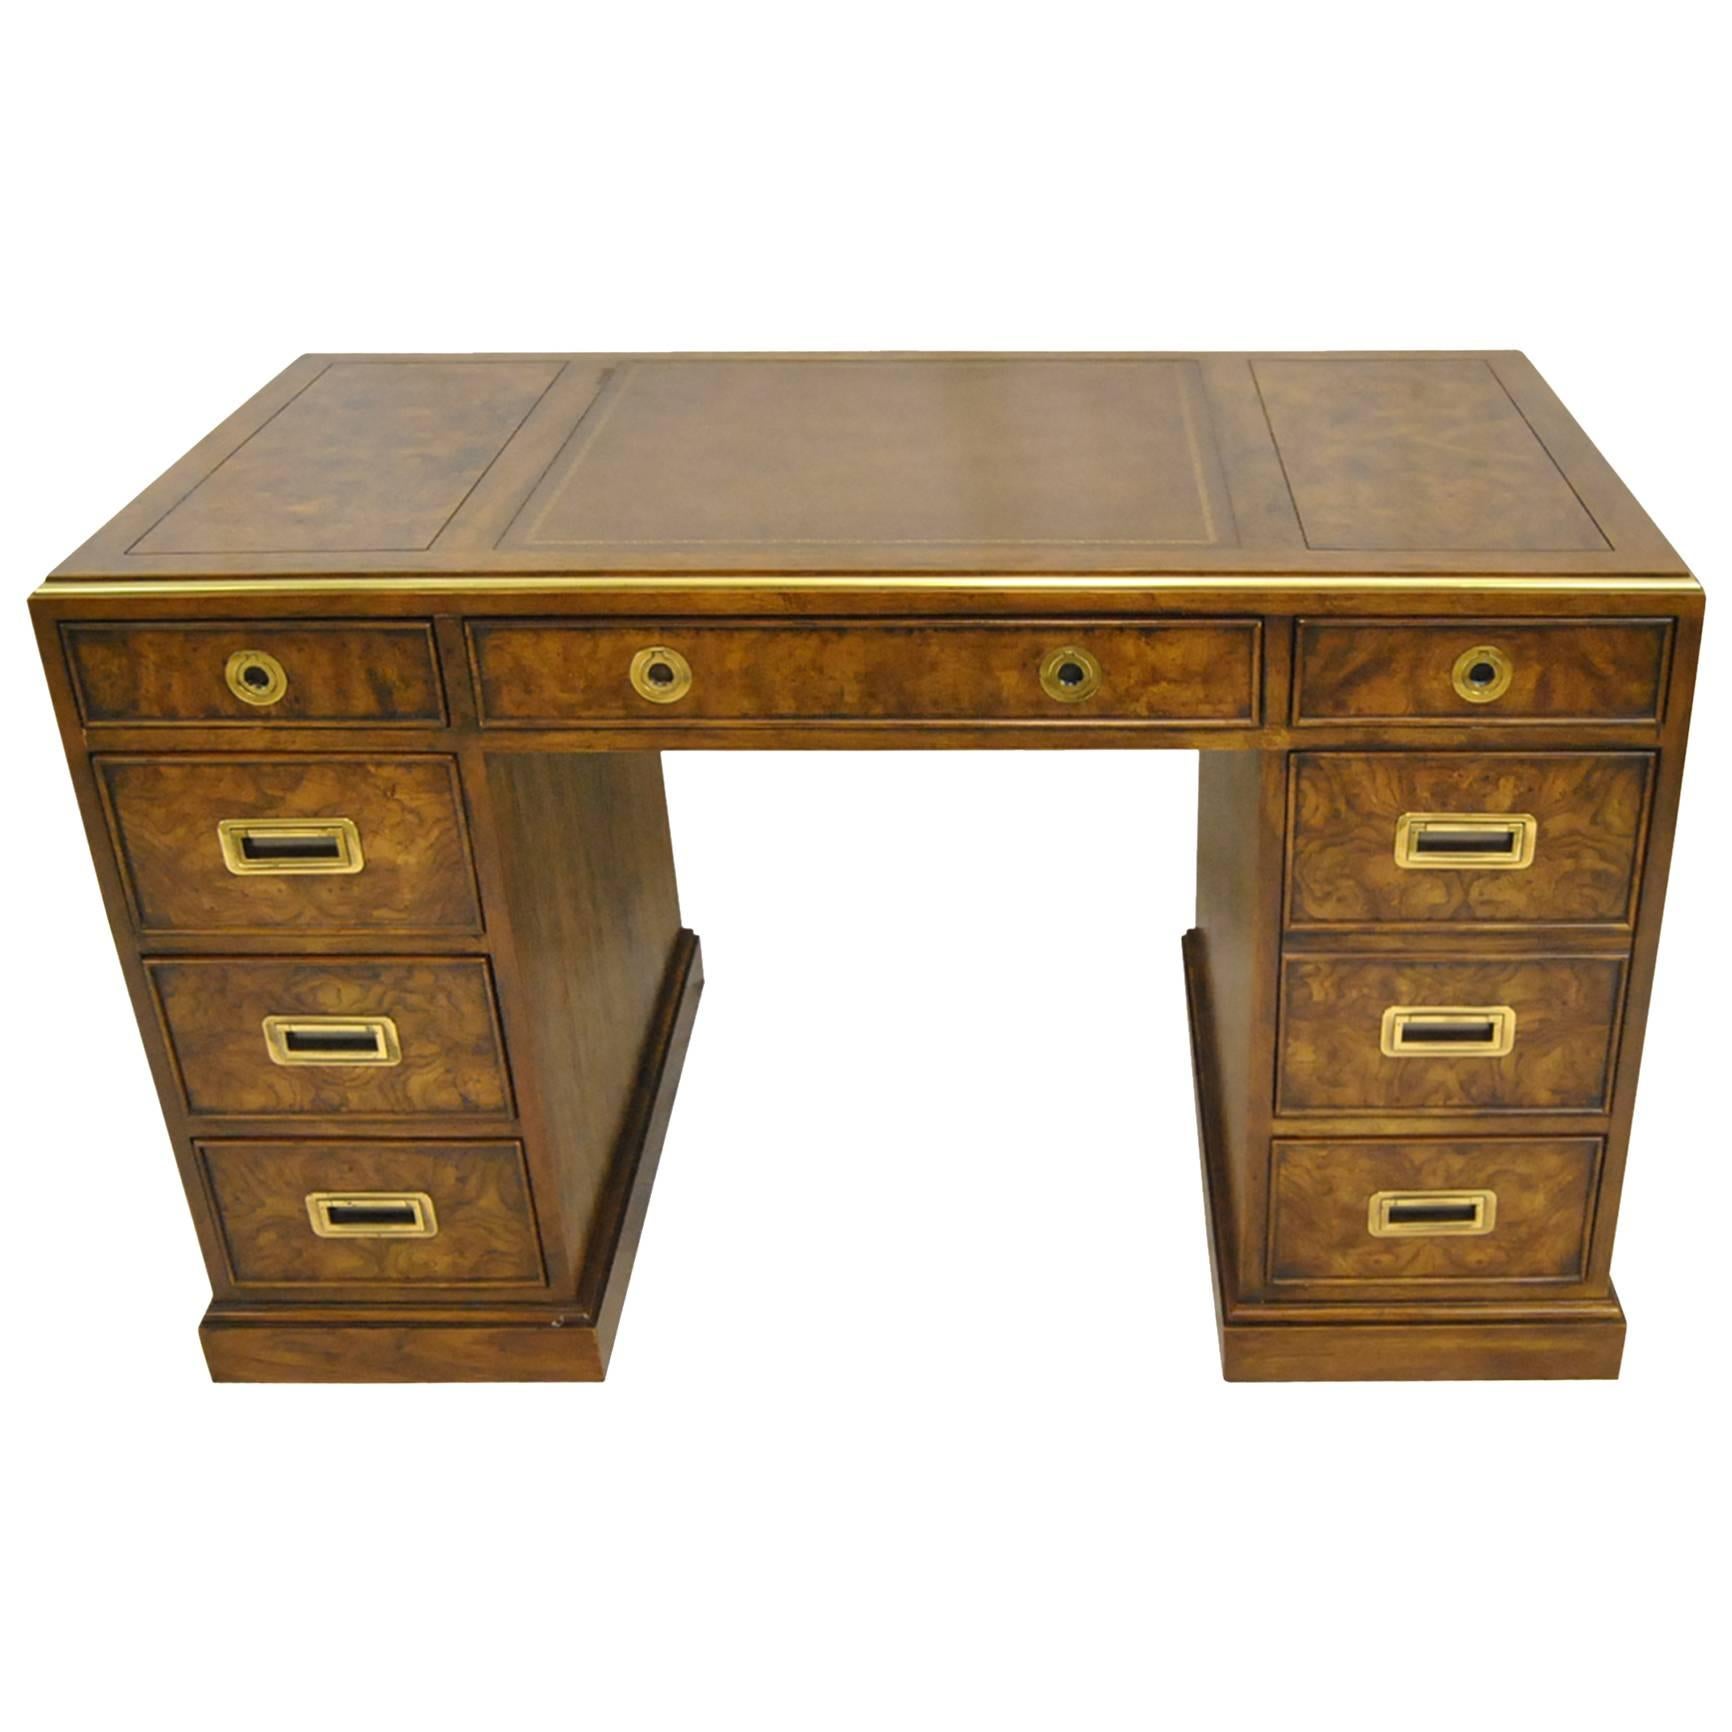 Campaign Style Burled Wood Desk by Drexel